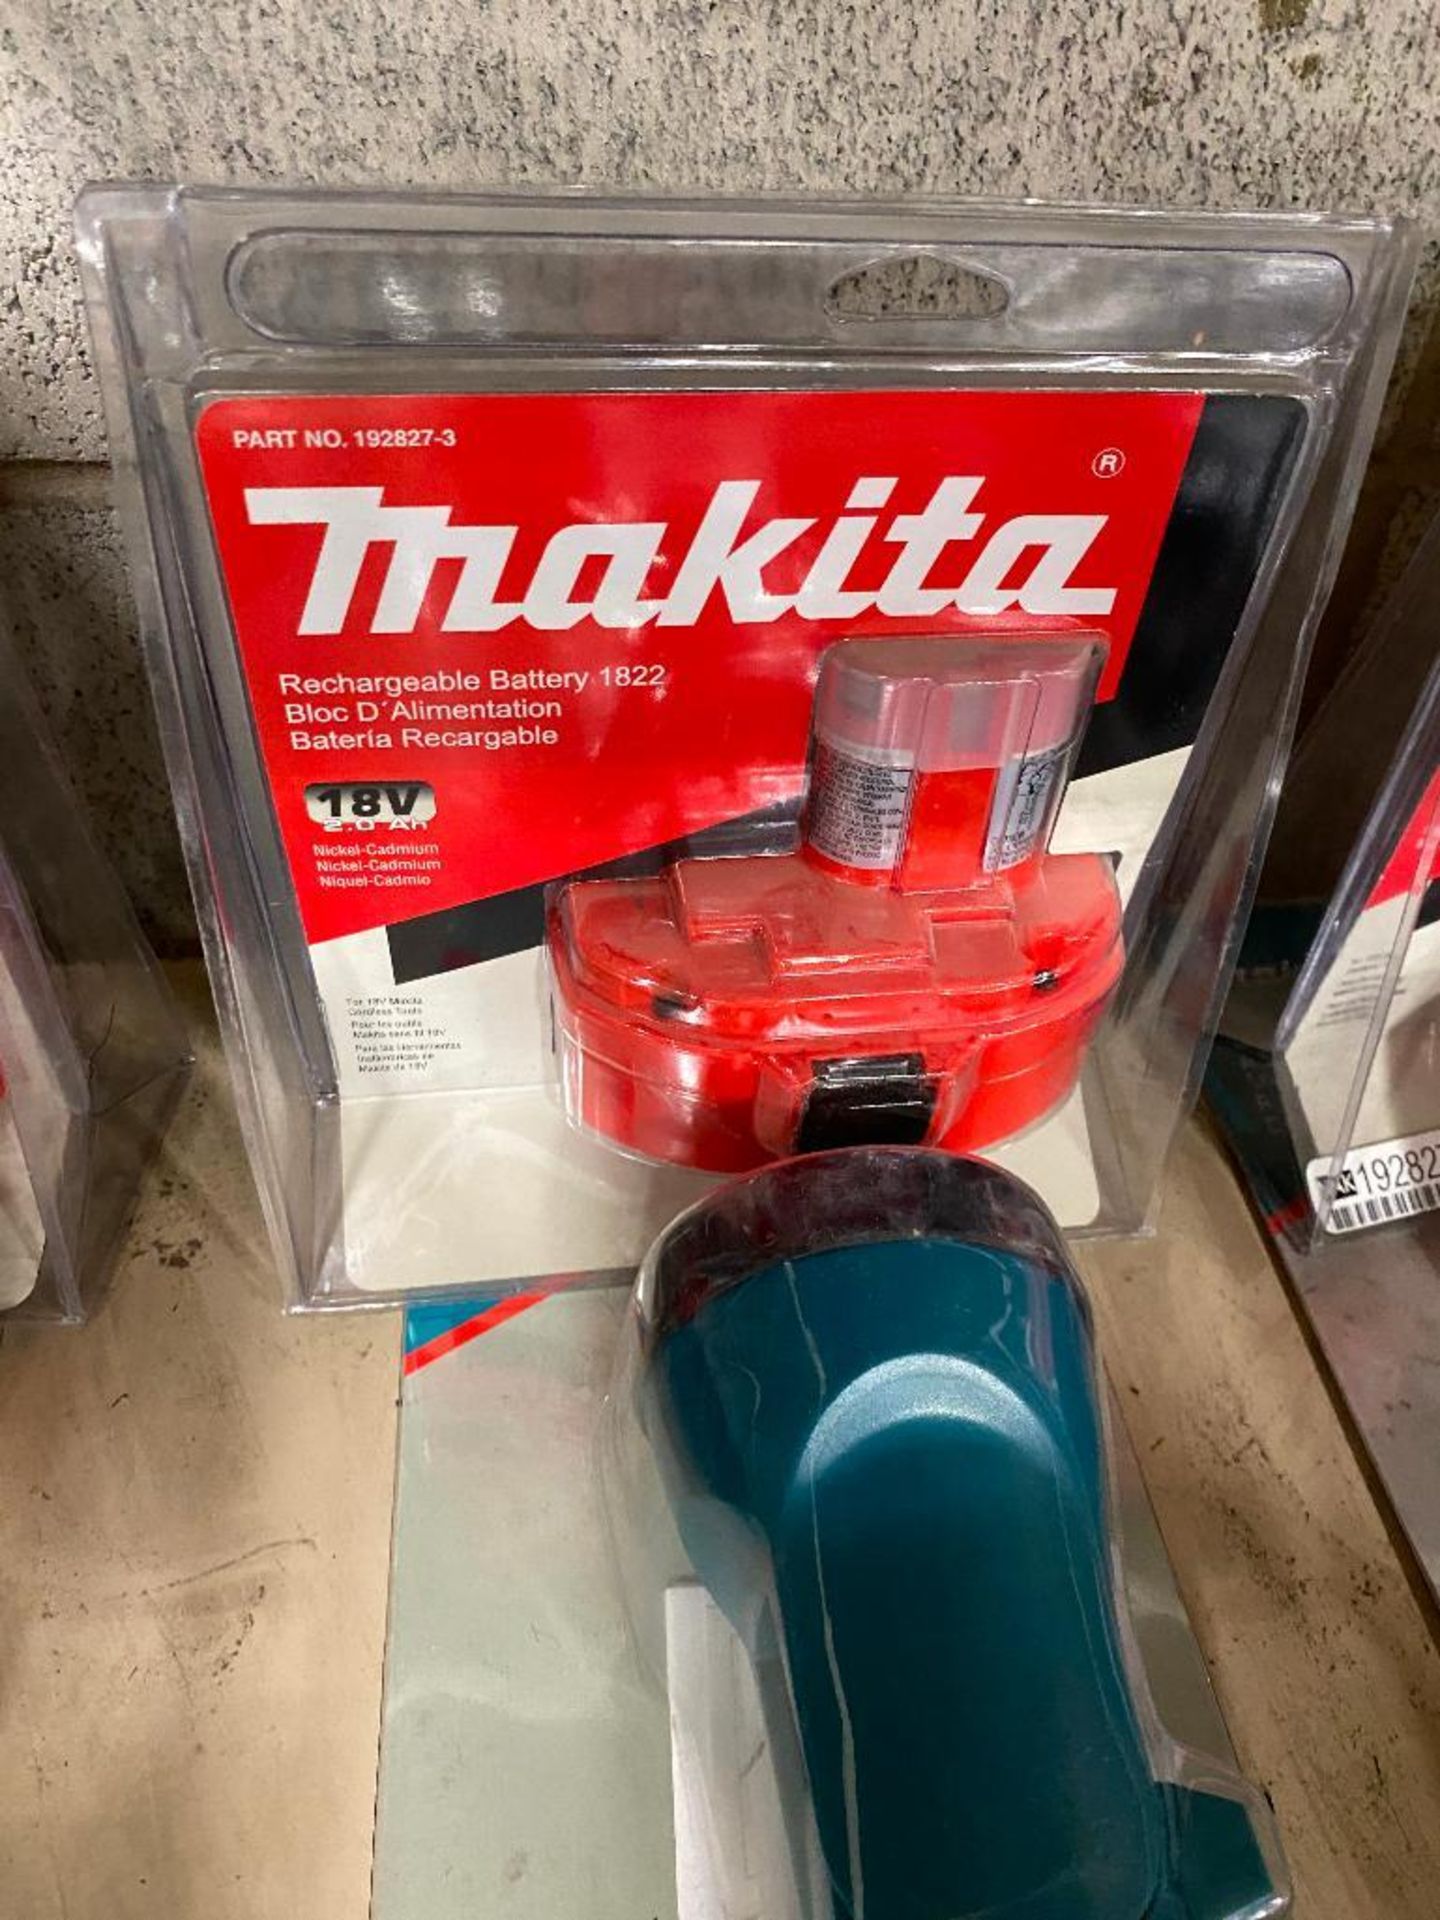 Makita 18V Rechargeable Flashlight and (1) 18V Battery - Image 2 of 3